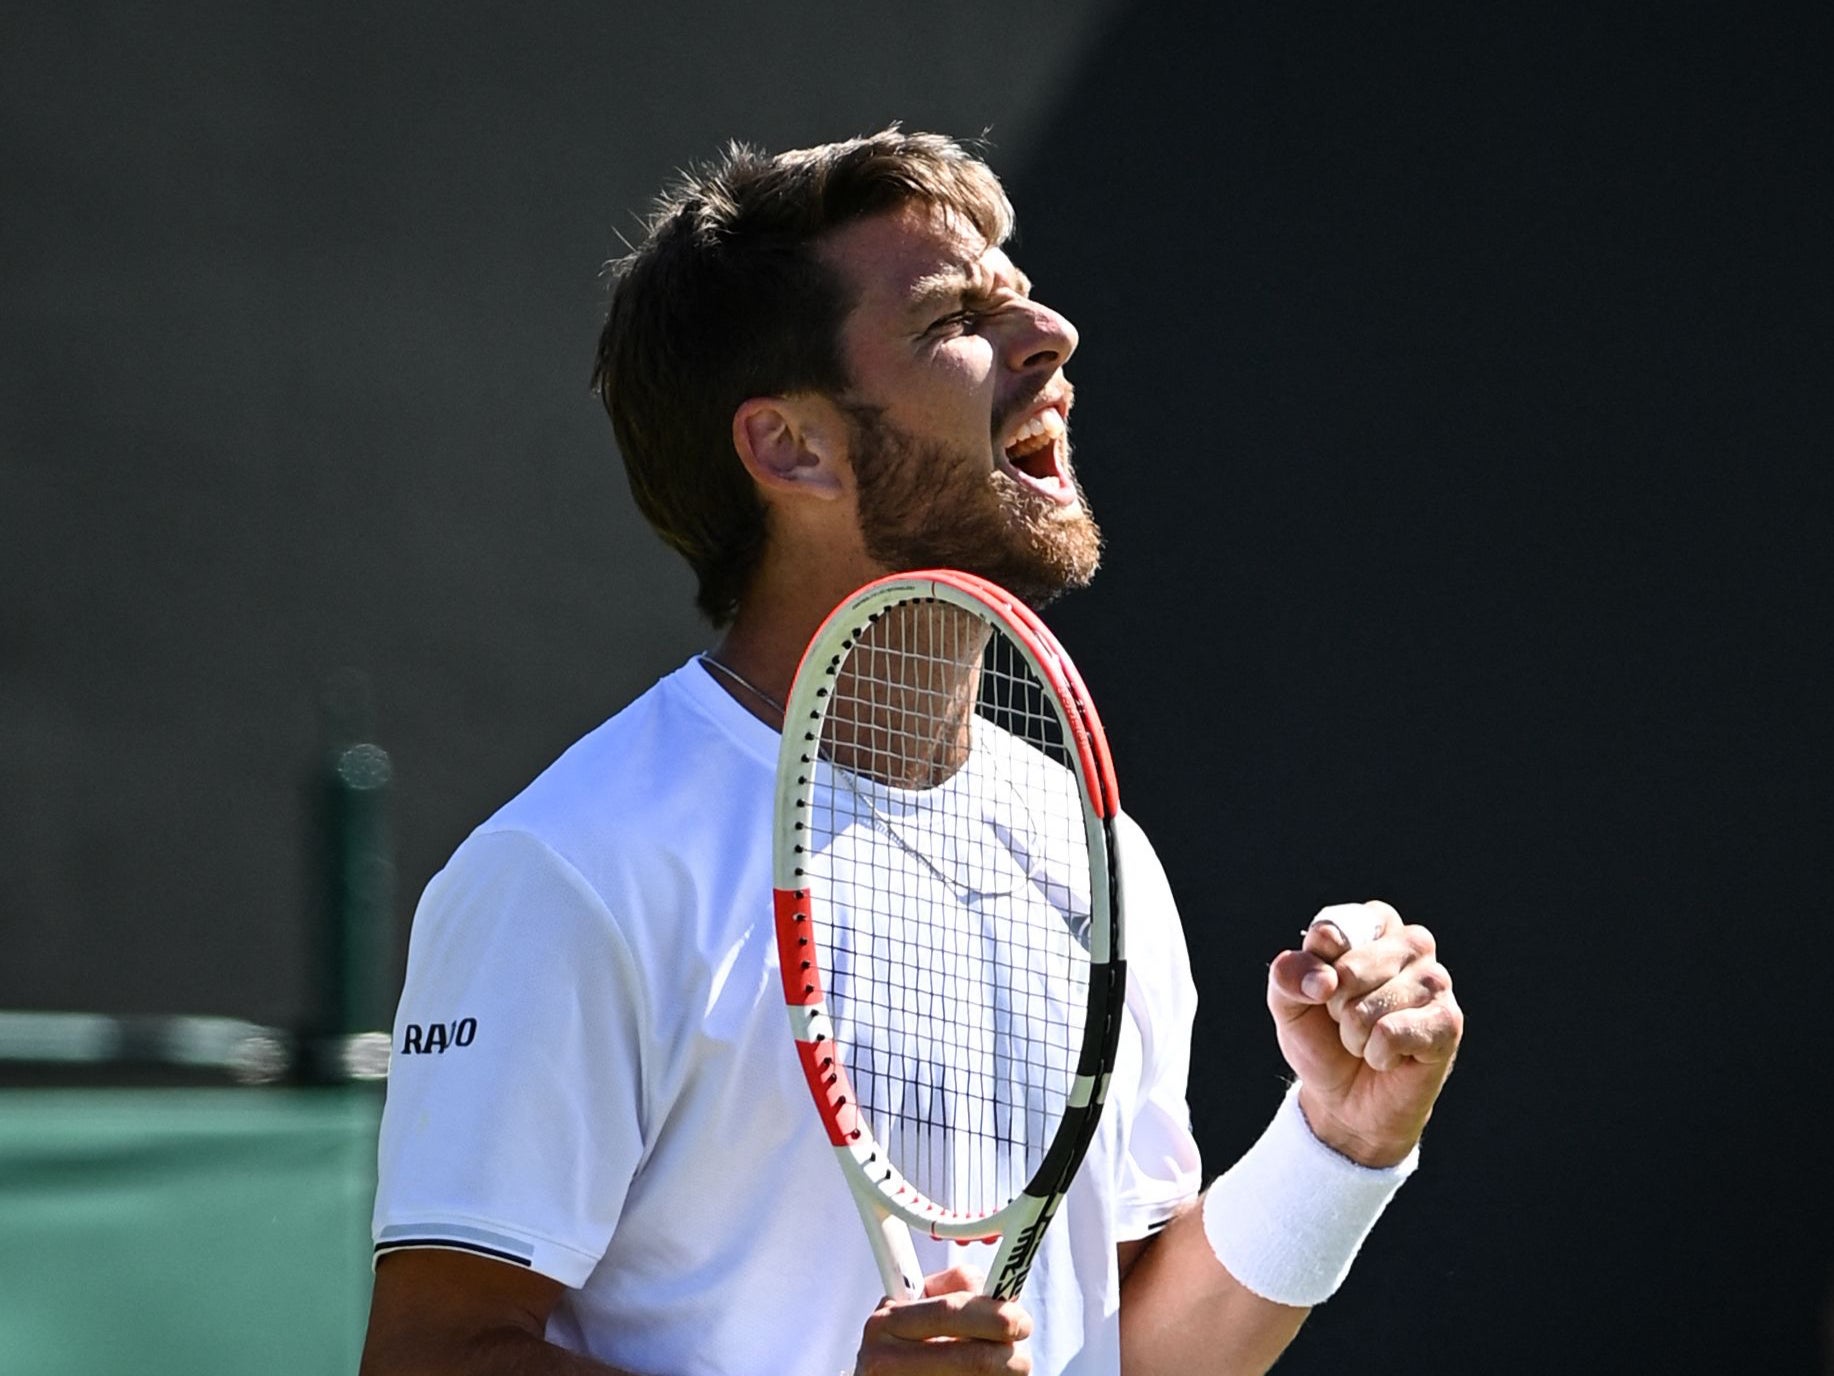 Wimbledon 2022 Cameron Norrie overcomes two rain delays to book spot in second round The Independent